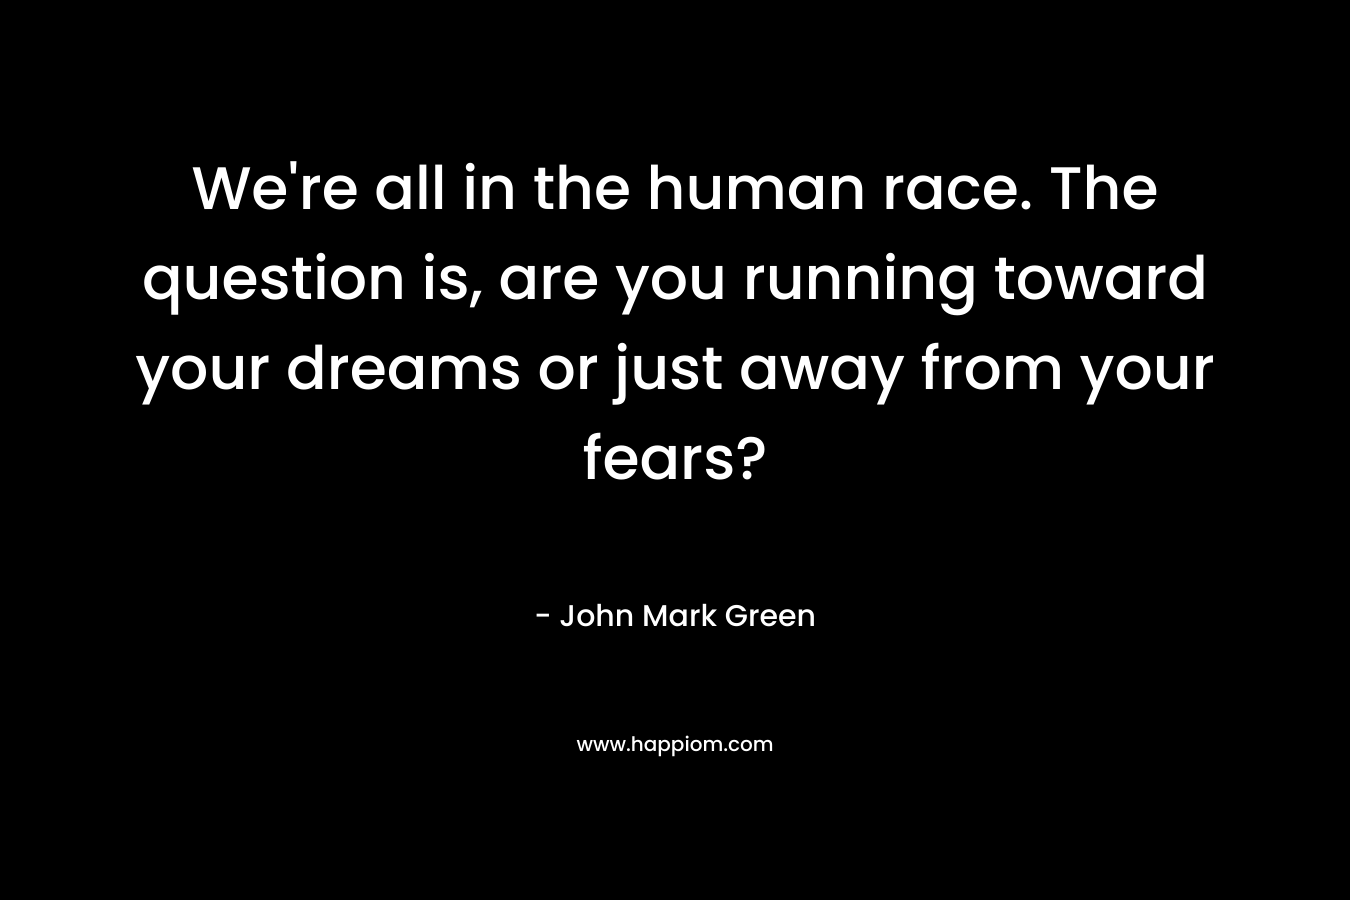 We're all in the human race. The question is, are you running toward your dreams or just away from your fears?